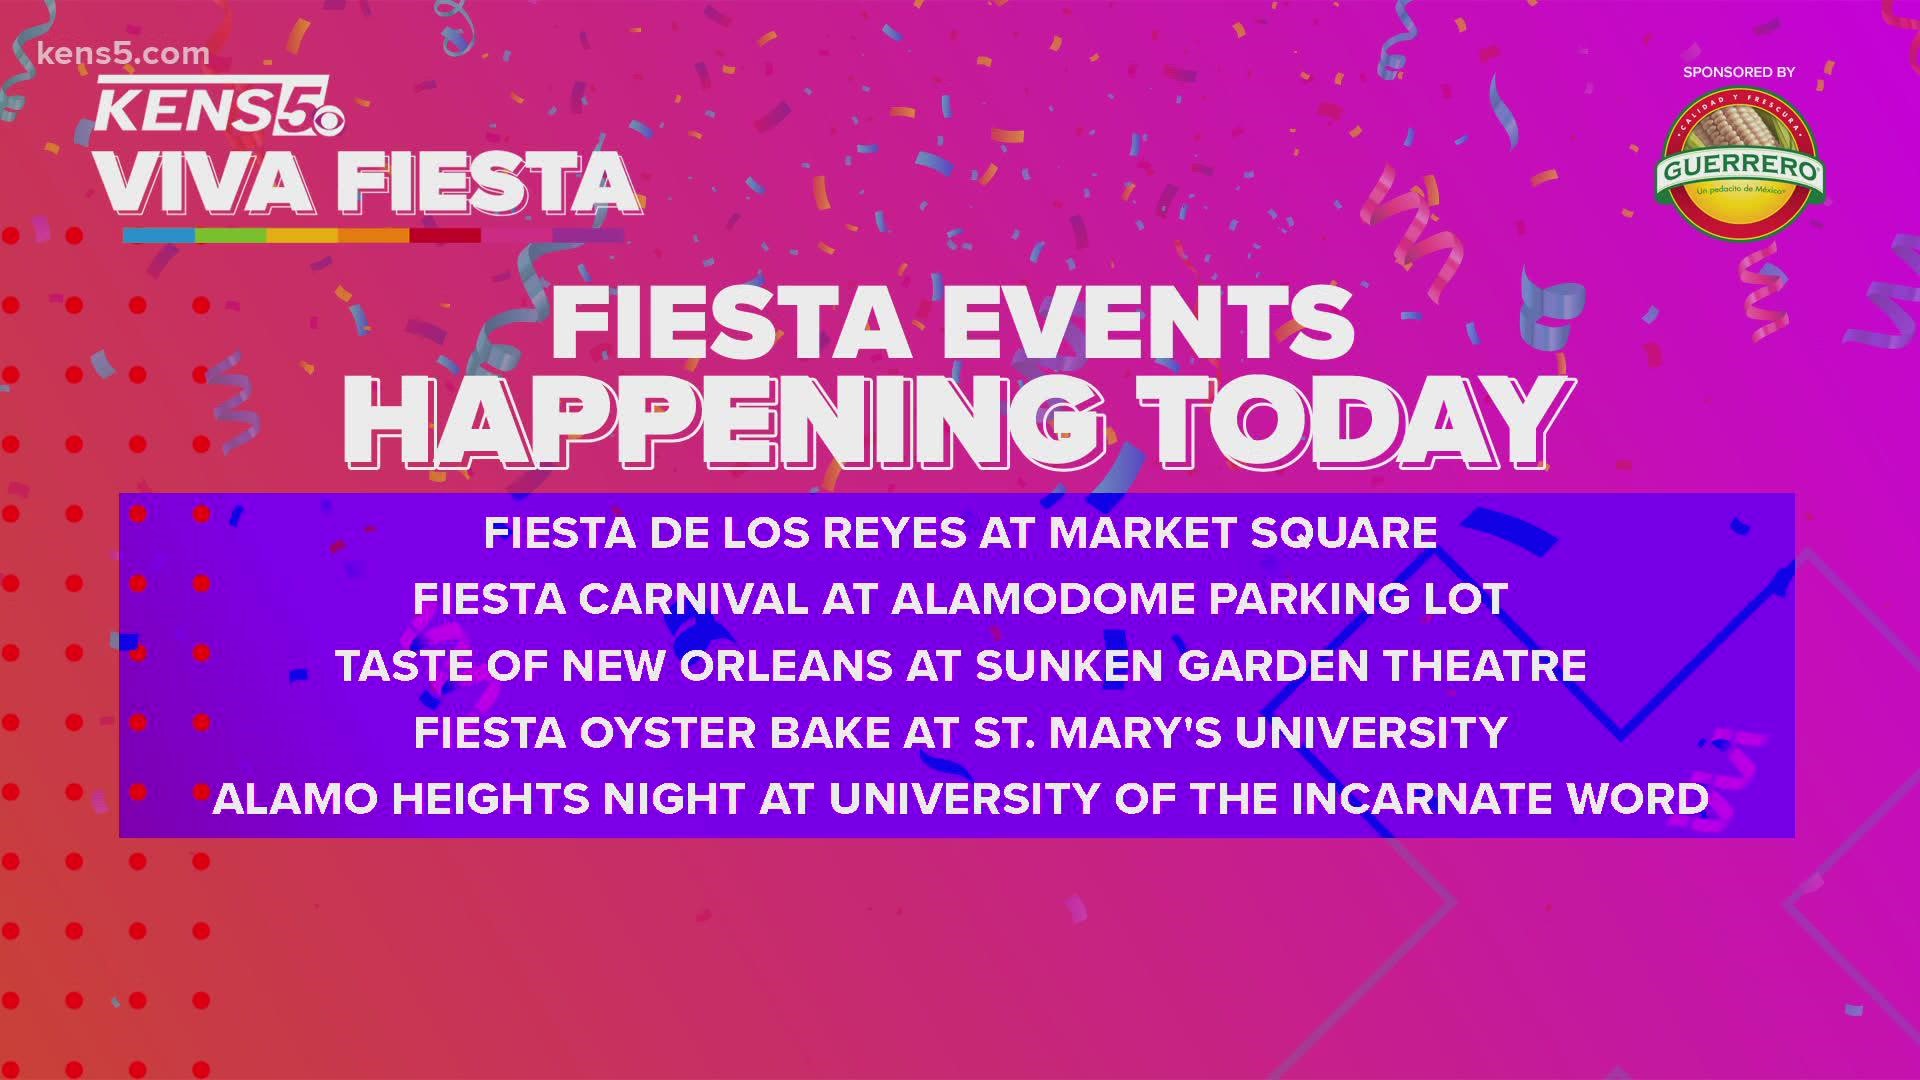 Here are the events taking place on the second day of Fiesta!